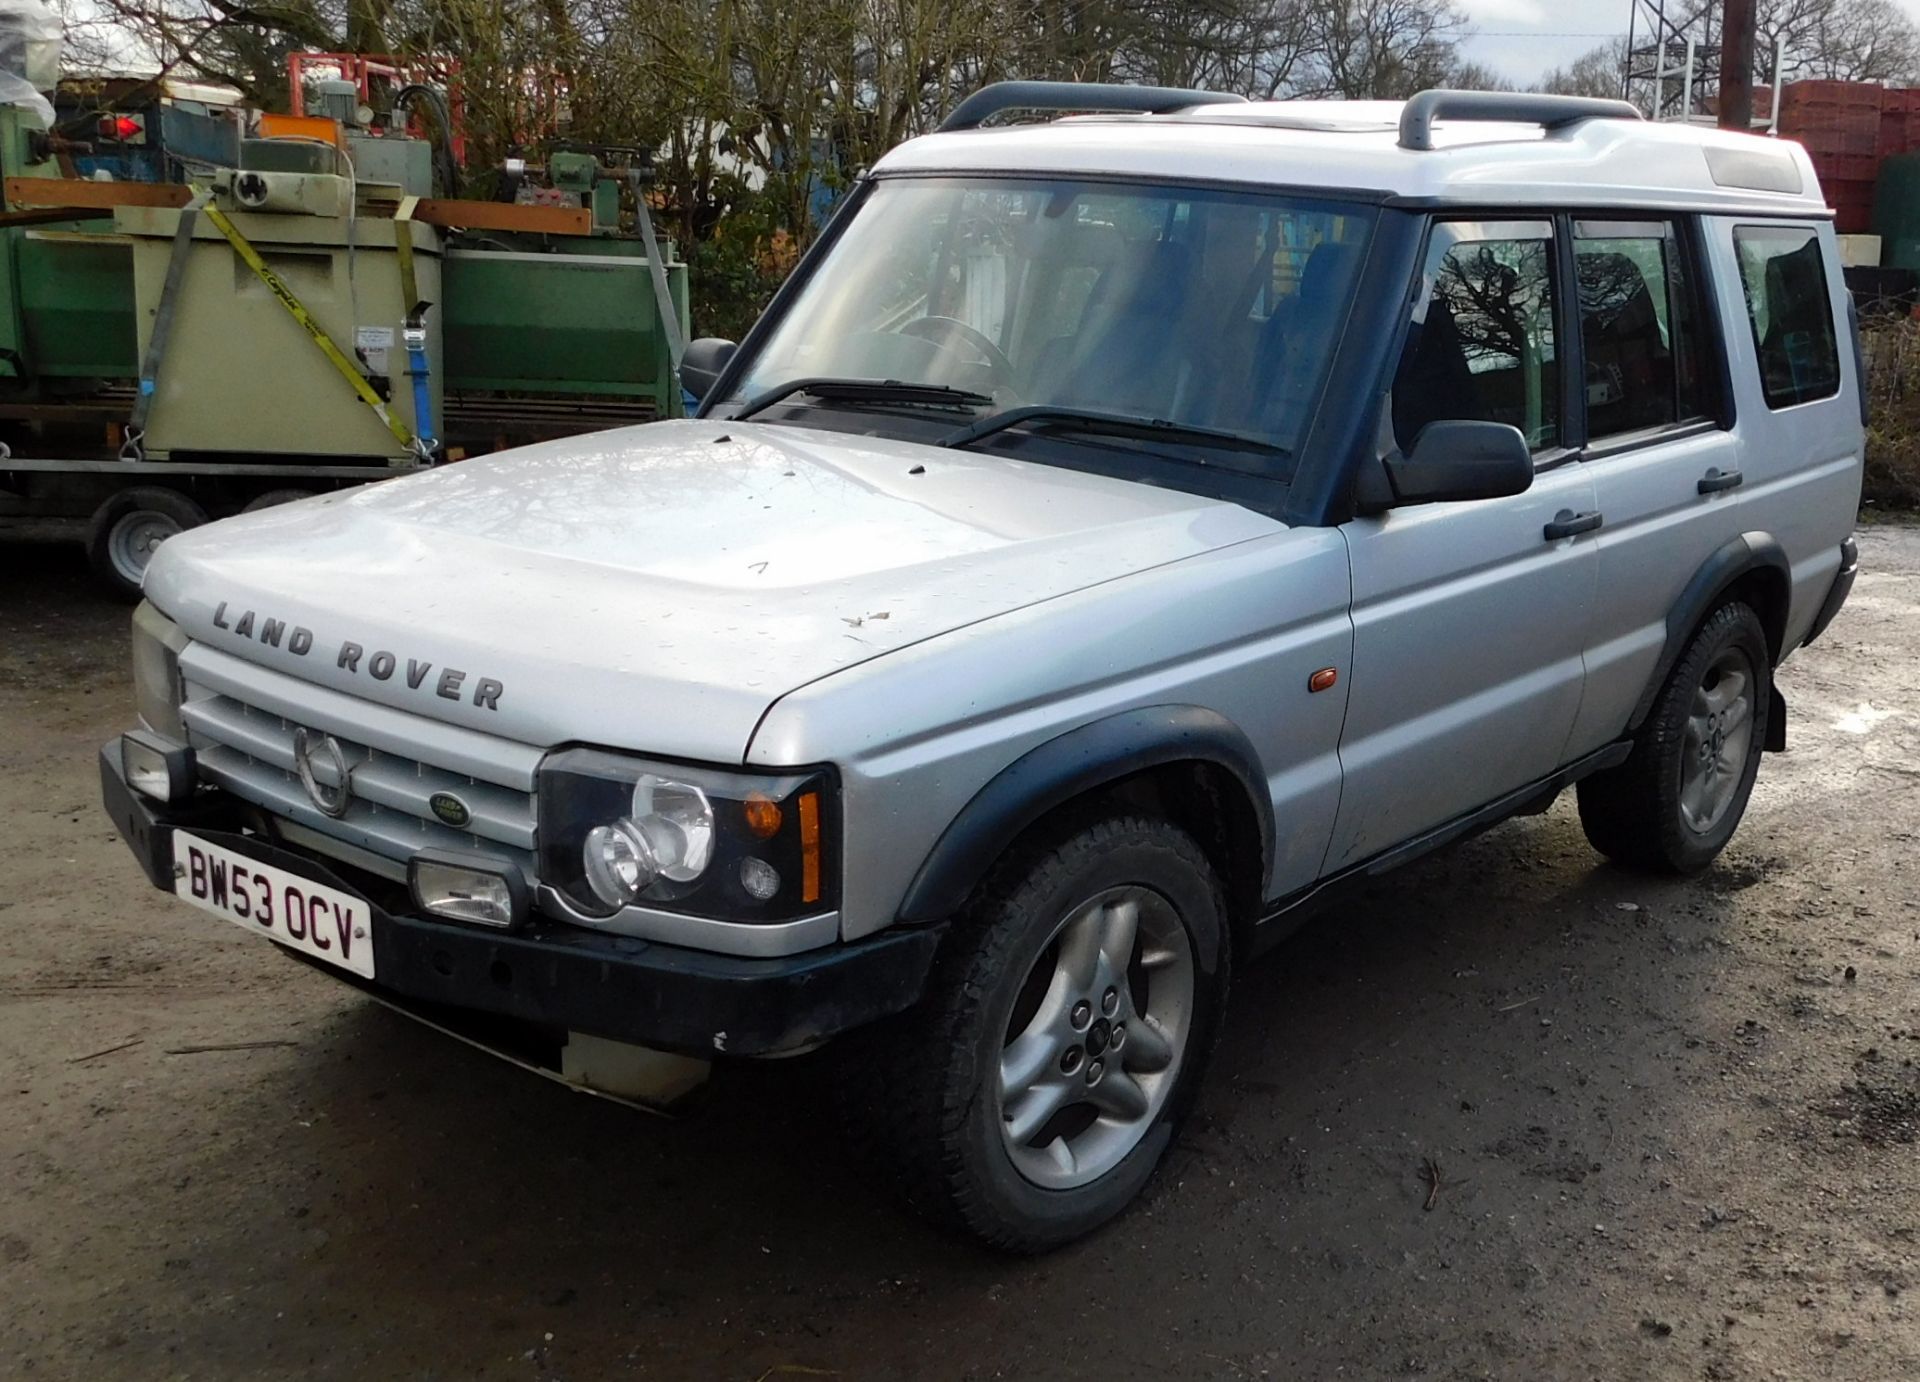 Land Rover Discovery, 2.5L Td5 ES Premium 7 Seat 5dr, Automatic, Registration BW53 OCV, First - Image 2 of 15